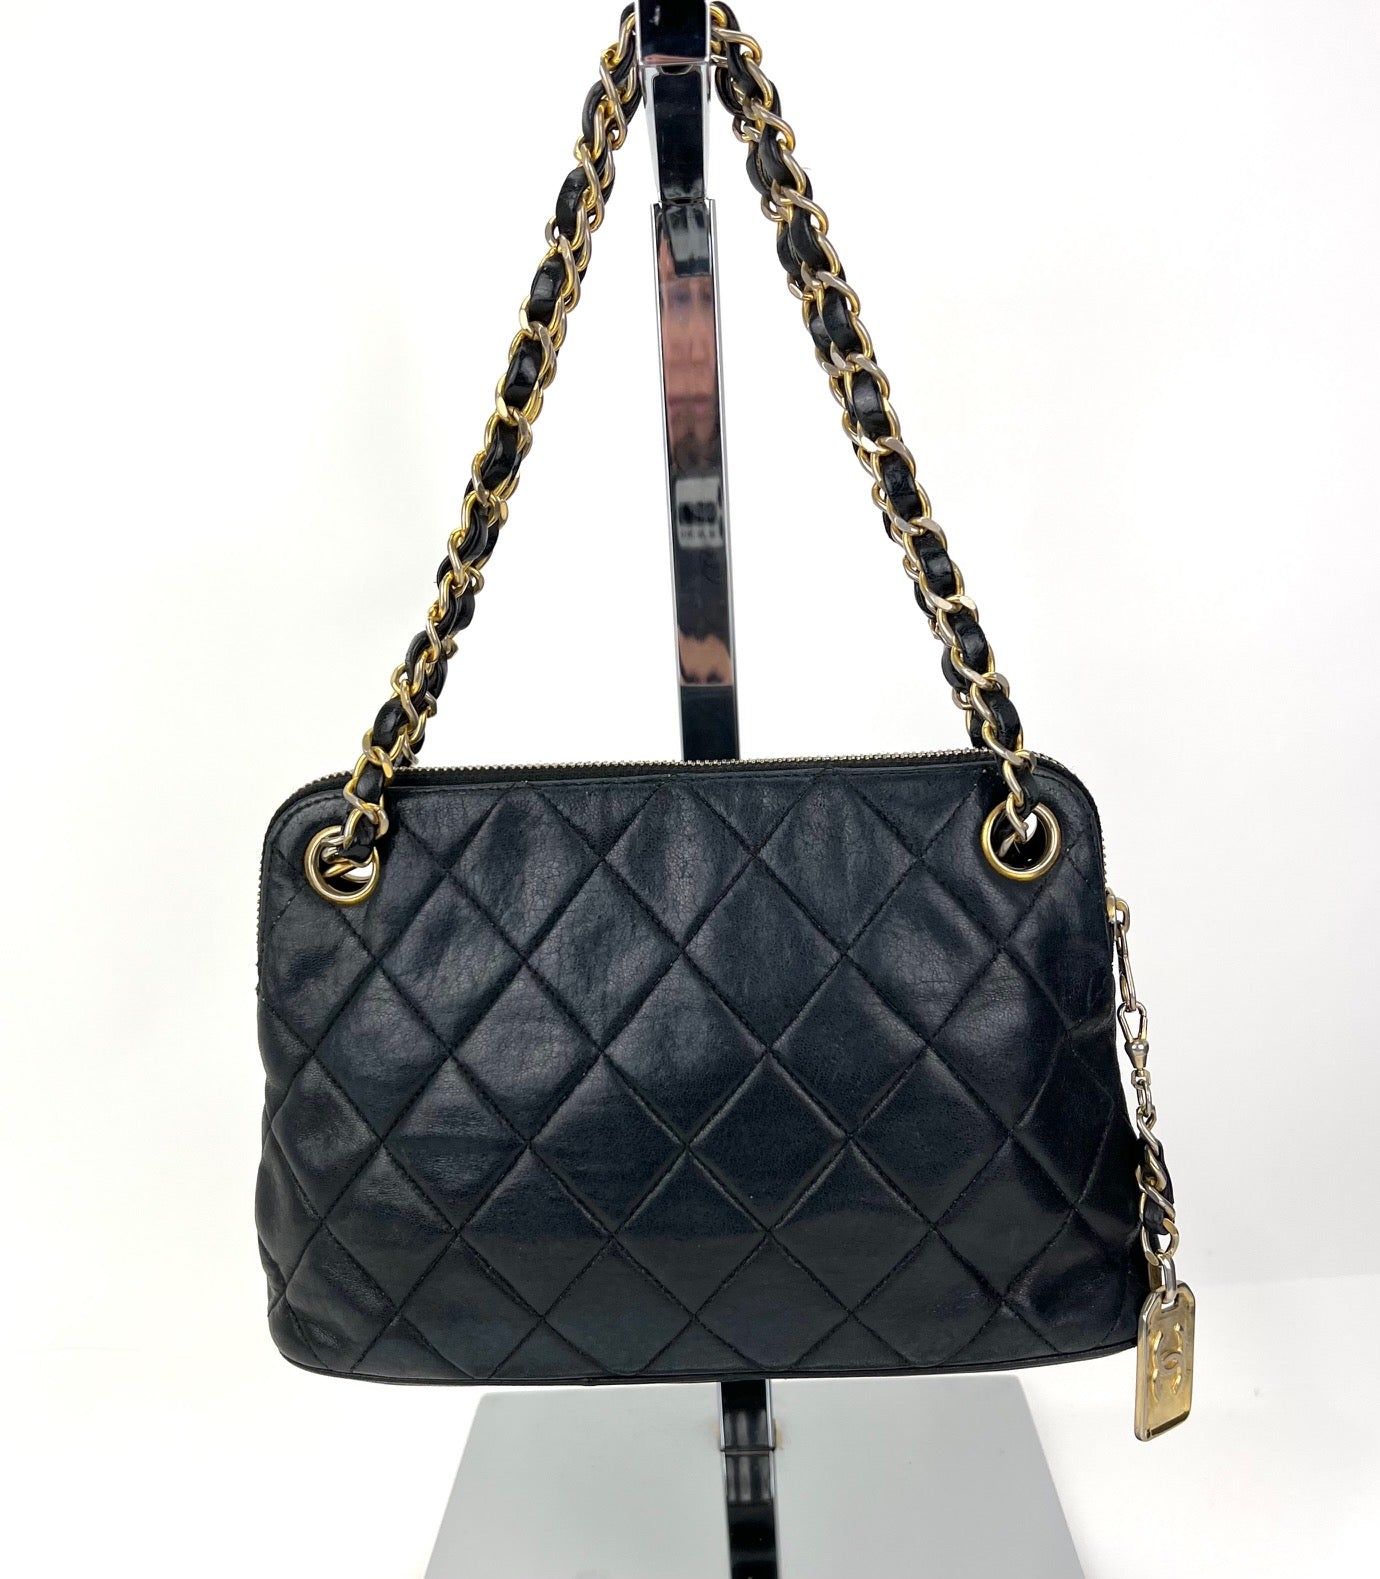 CHANEL CHANEL Bag Quilted Lambskin Leather Chain Vintage Black